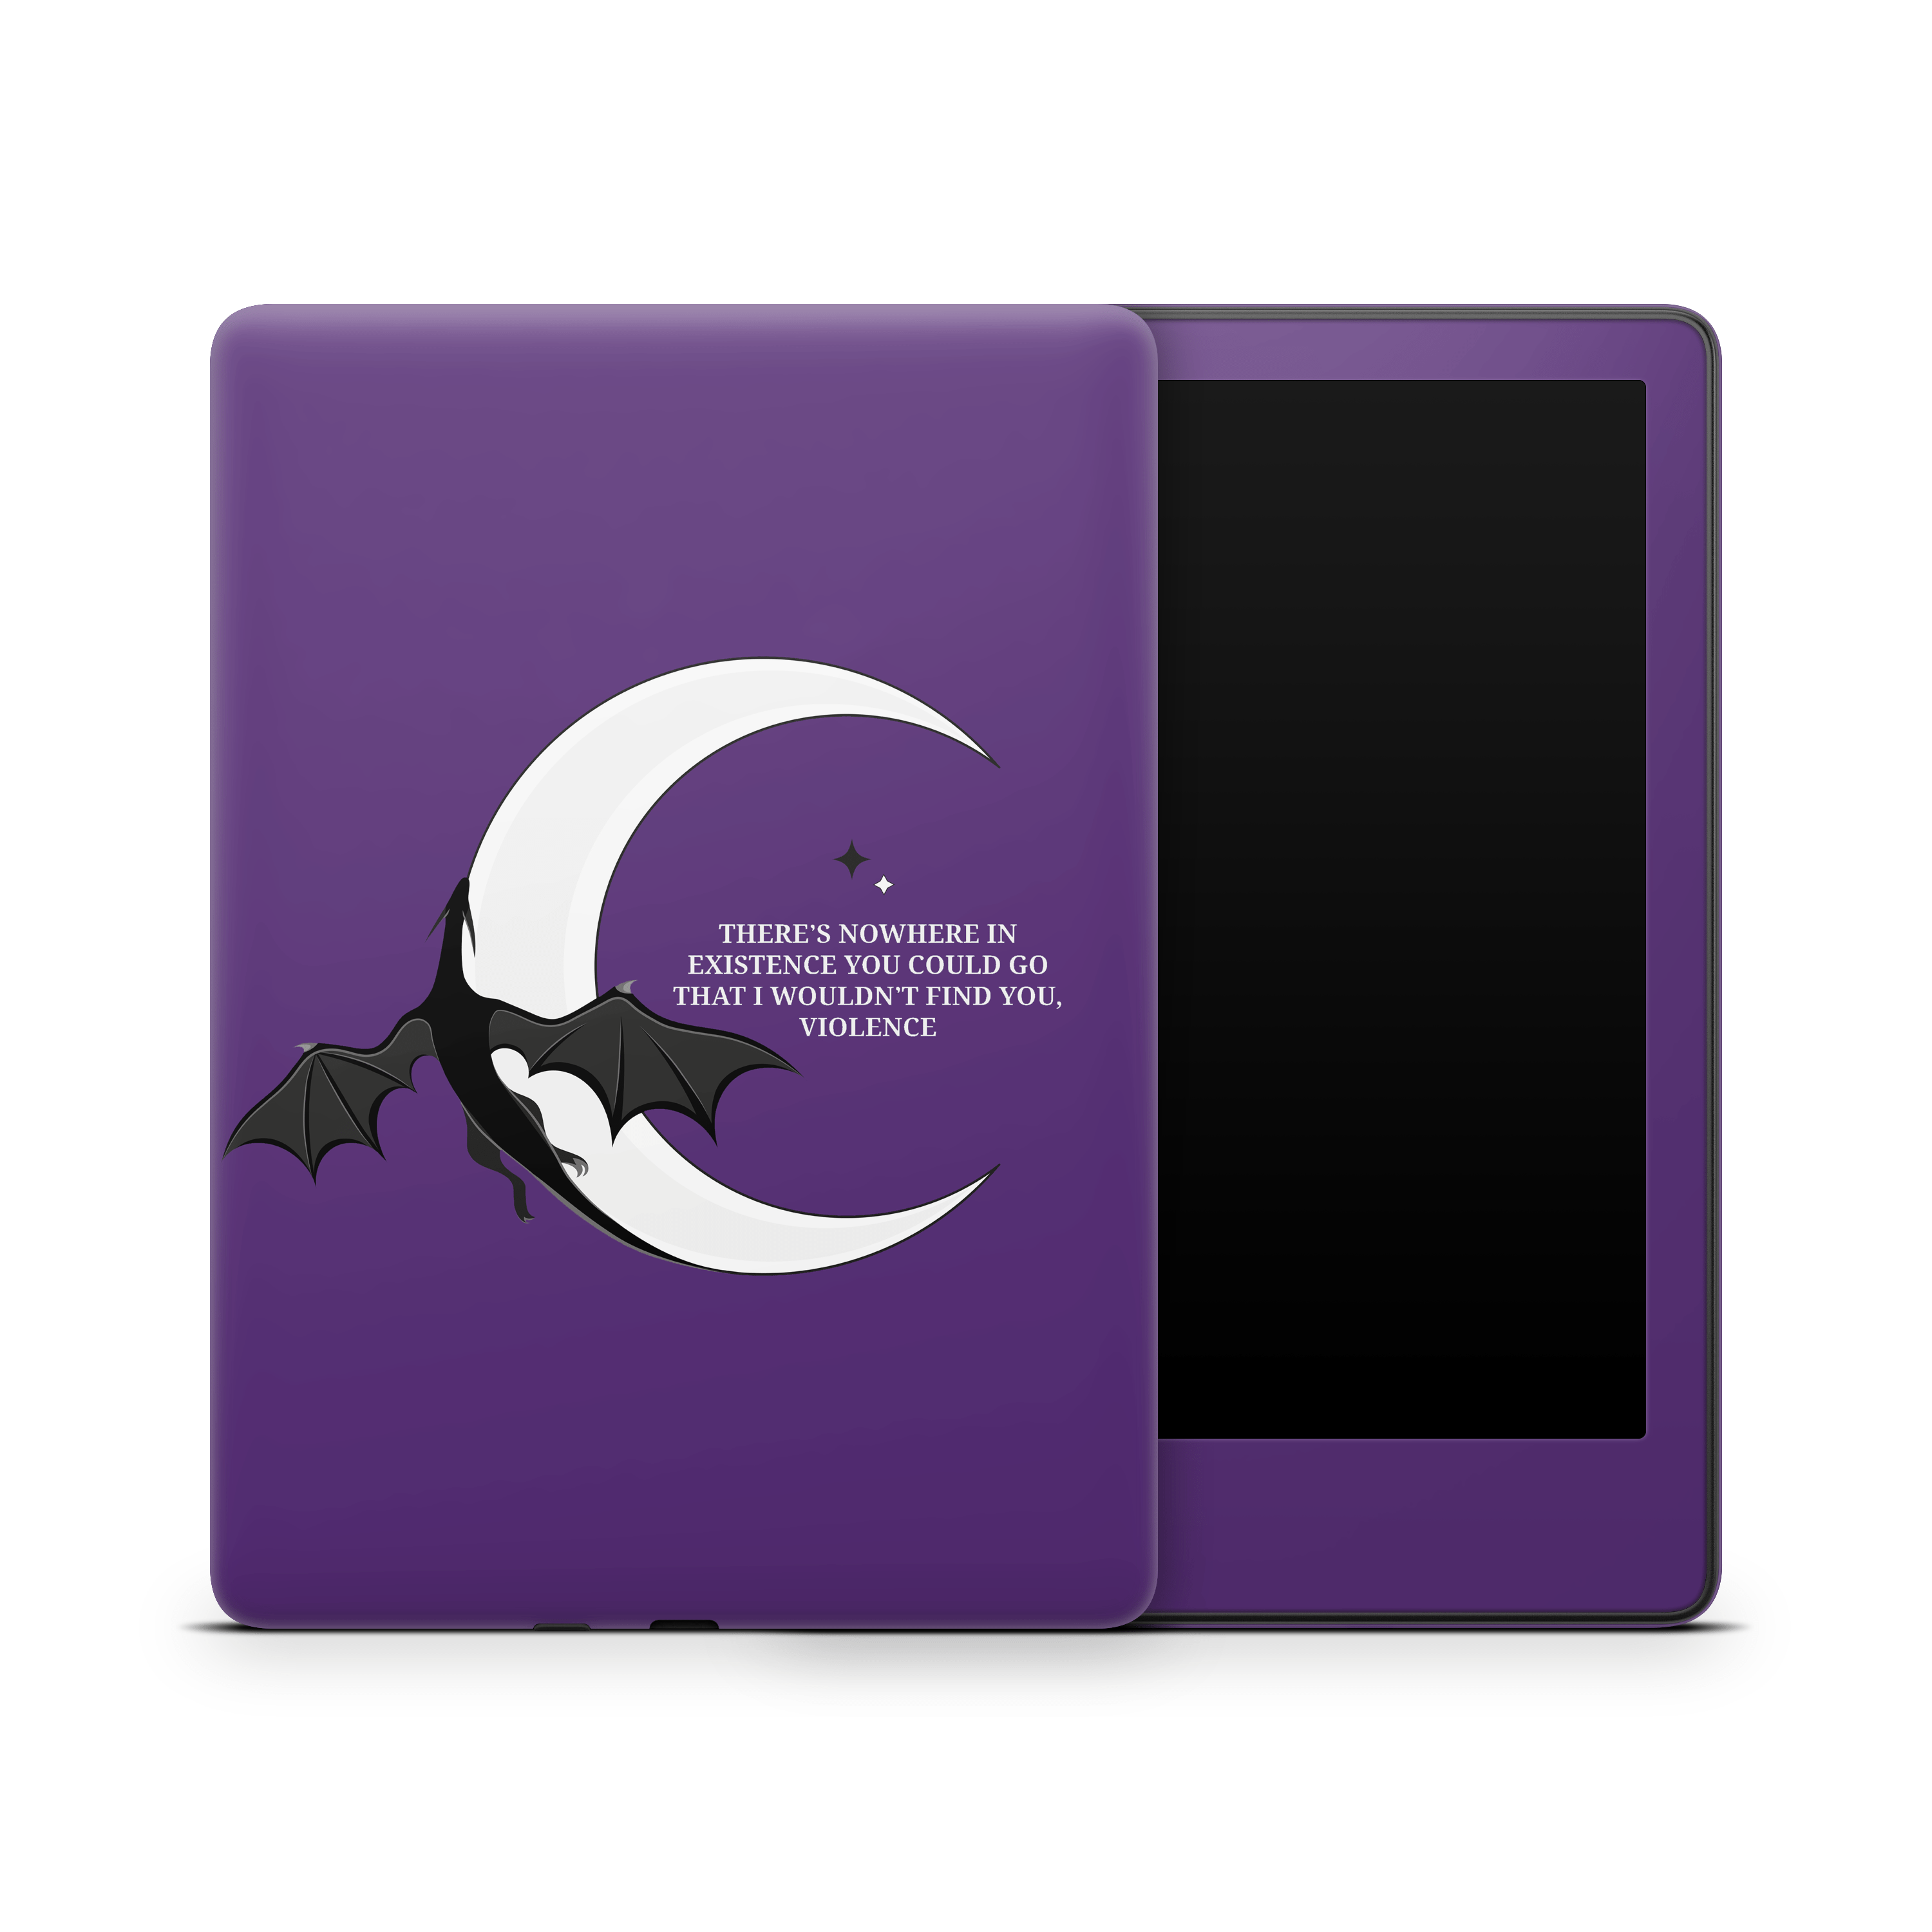 Xaden's Love (Violet) Kindle Skins | Fourth Wing Officially Licensed